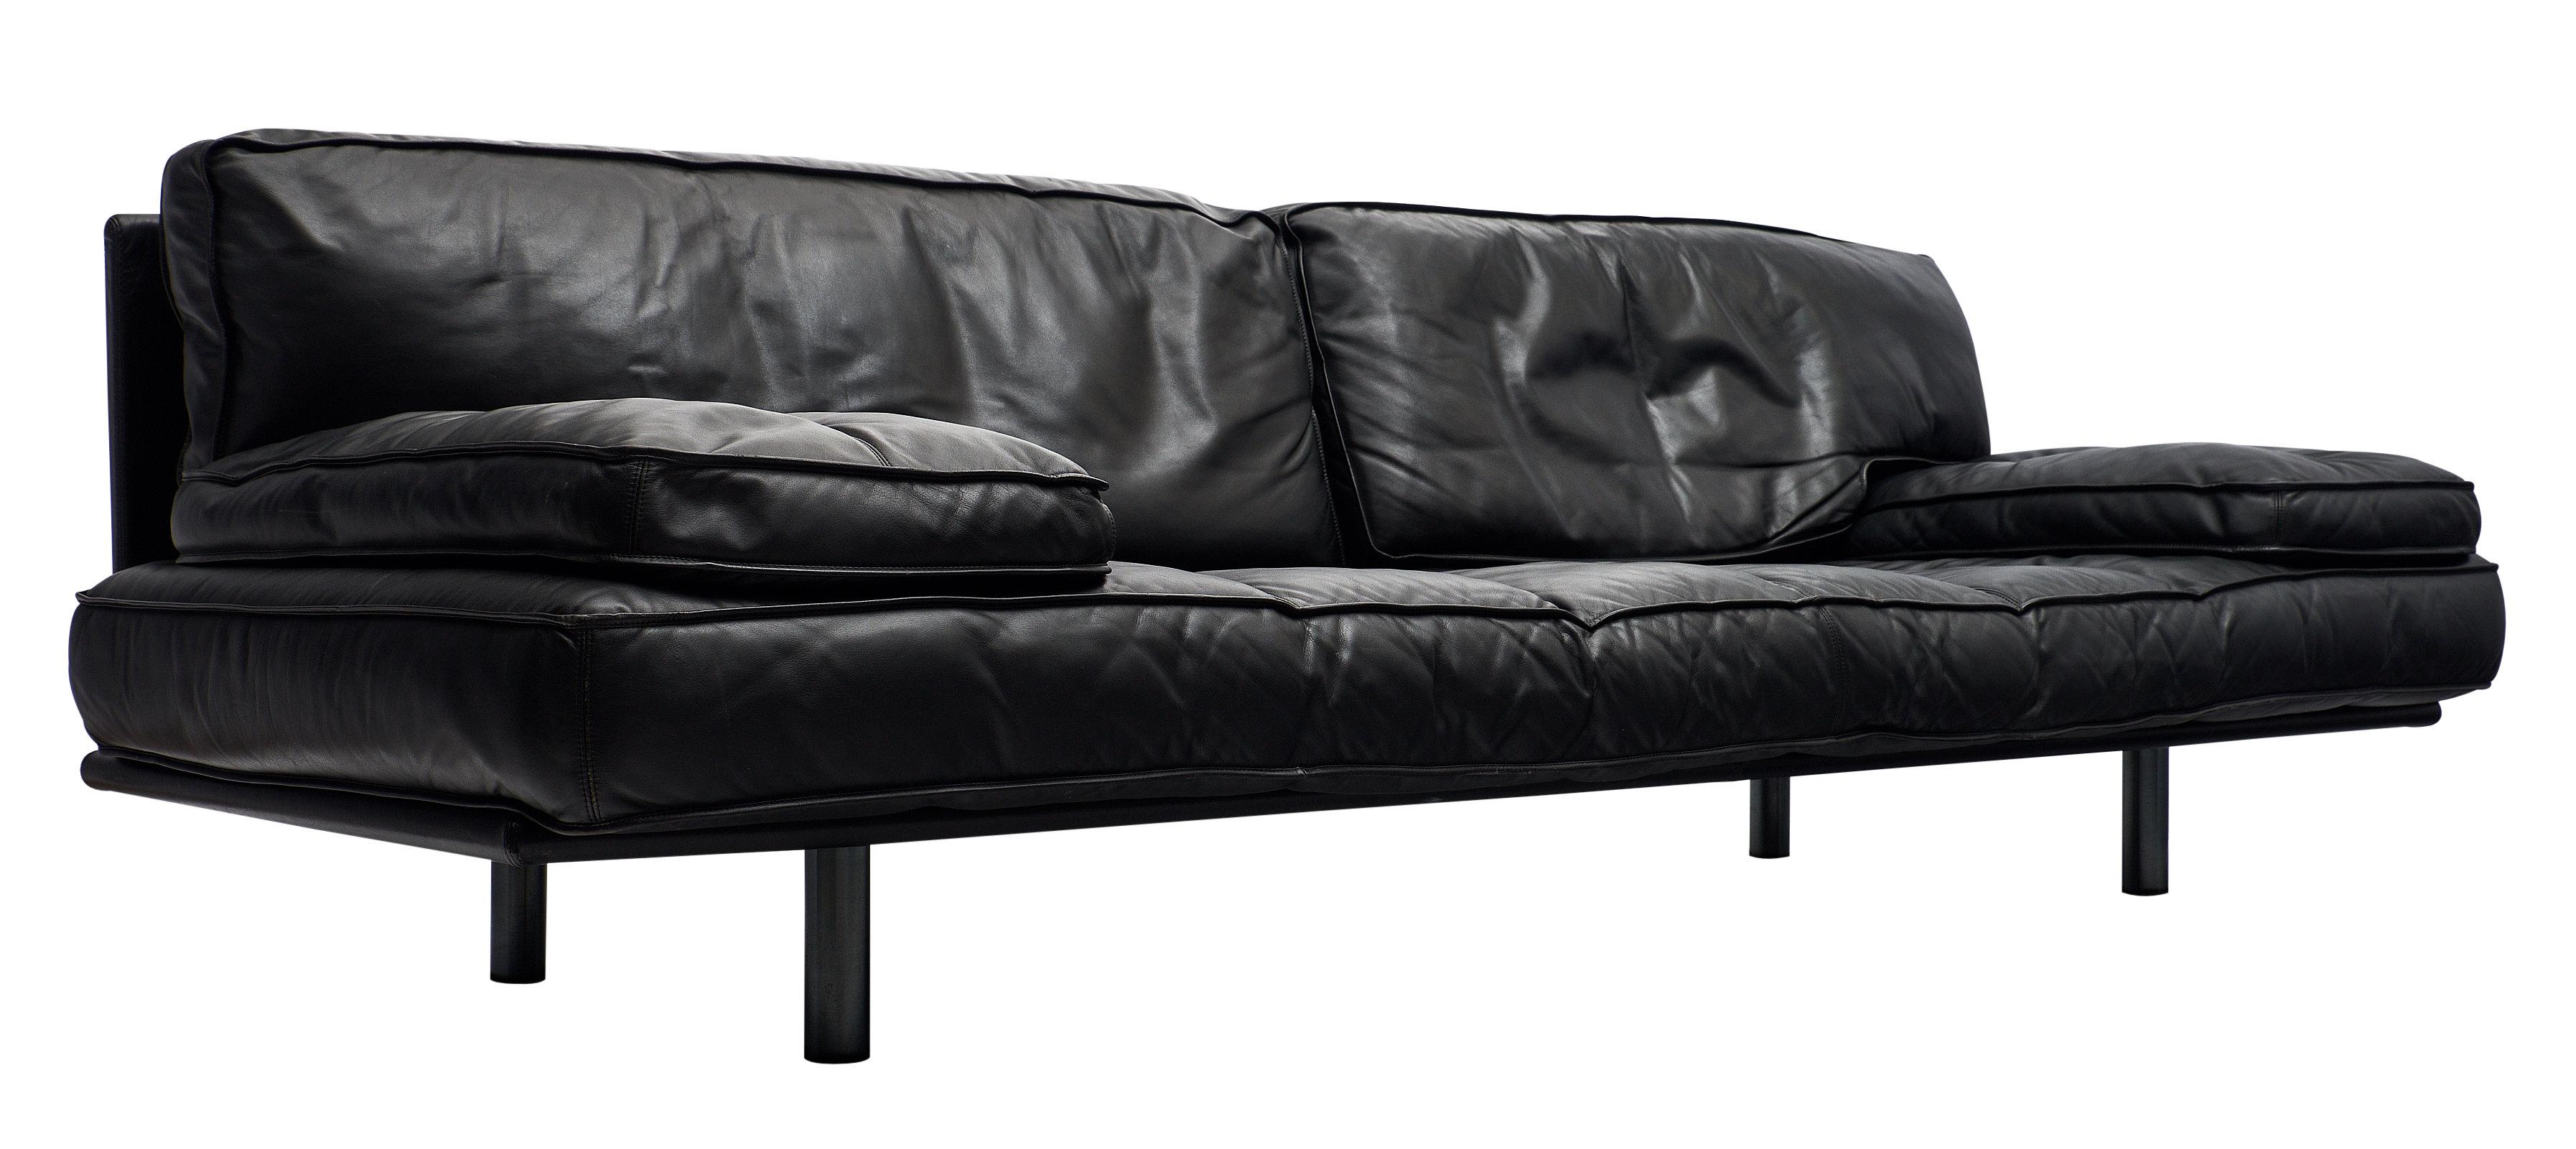 Milano 210 Italian leather sofa by Zanotta, made in Italy. This piece is in excellent vintage condition and is extremely comfortable. We love the clean lines and feather cushions on the back and armrests. The steel frame features elastic strip